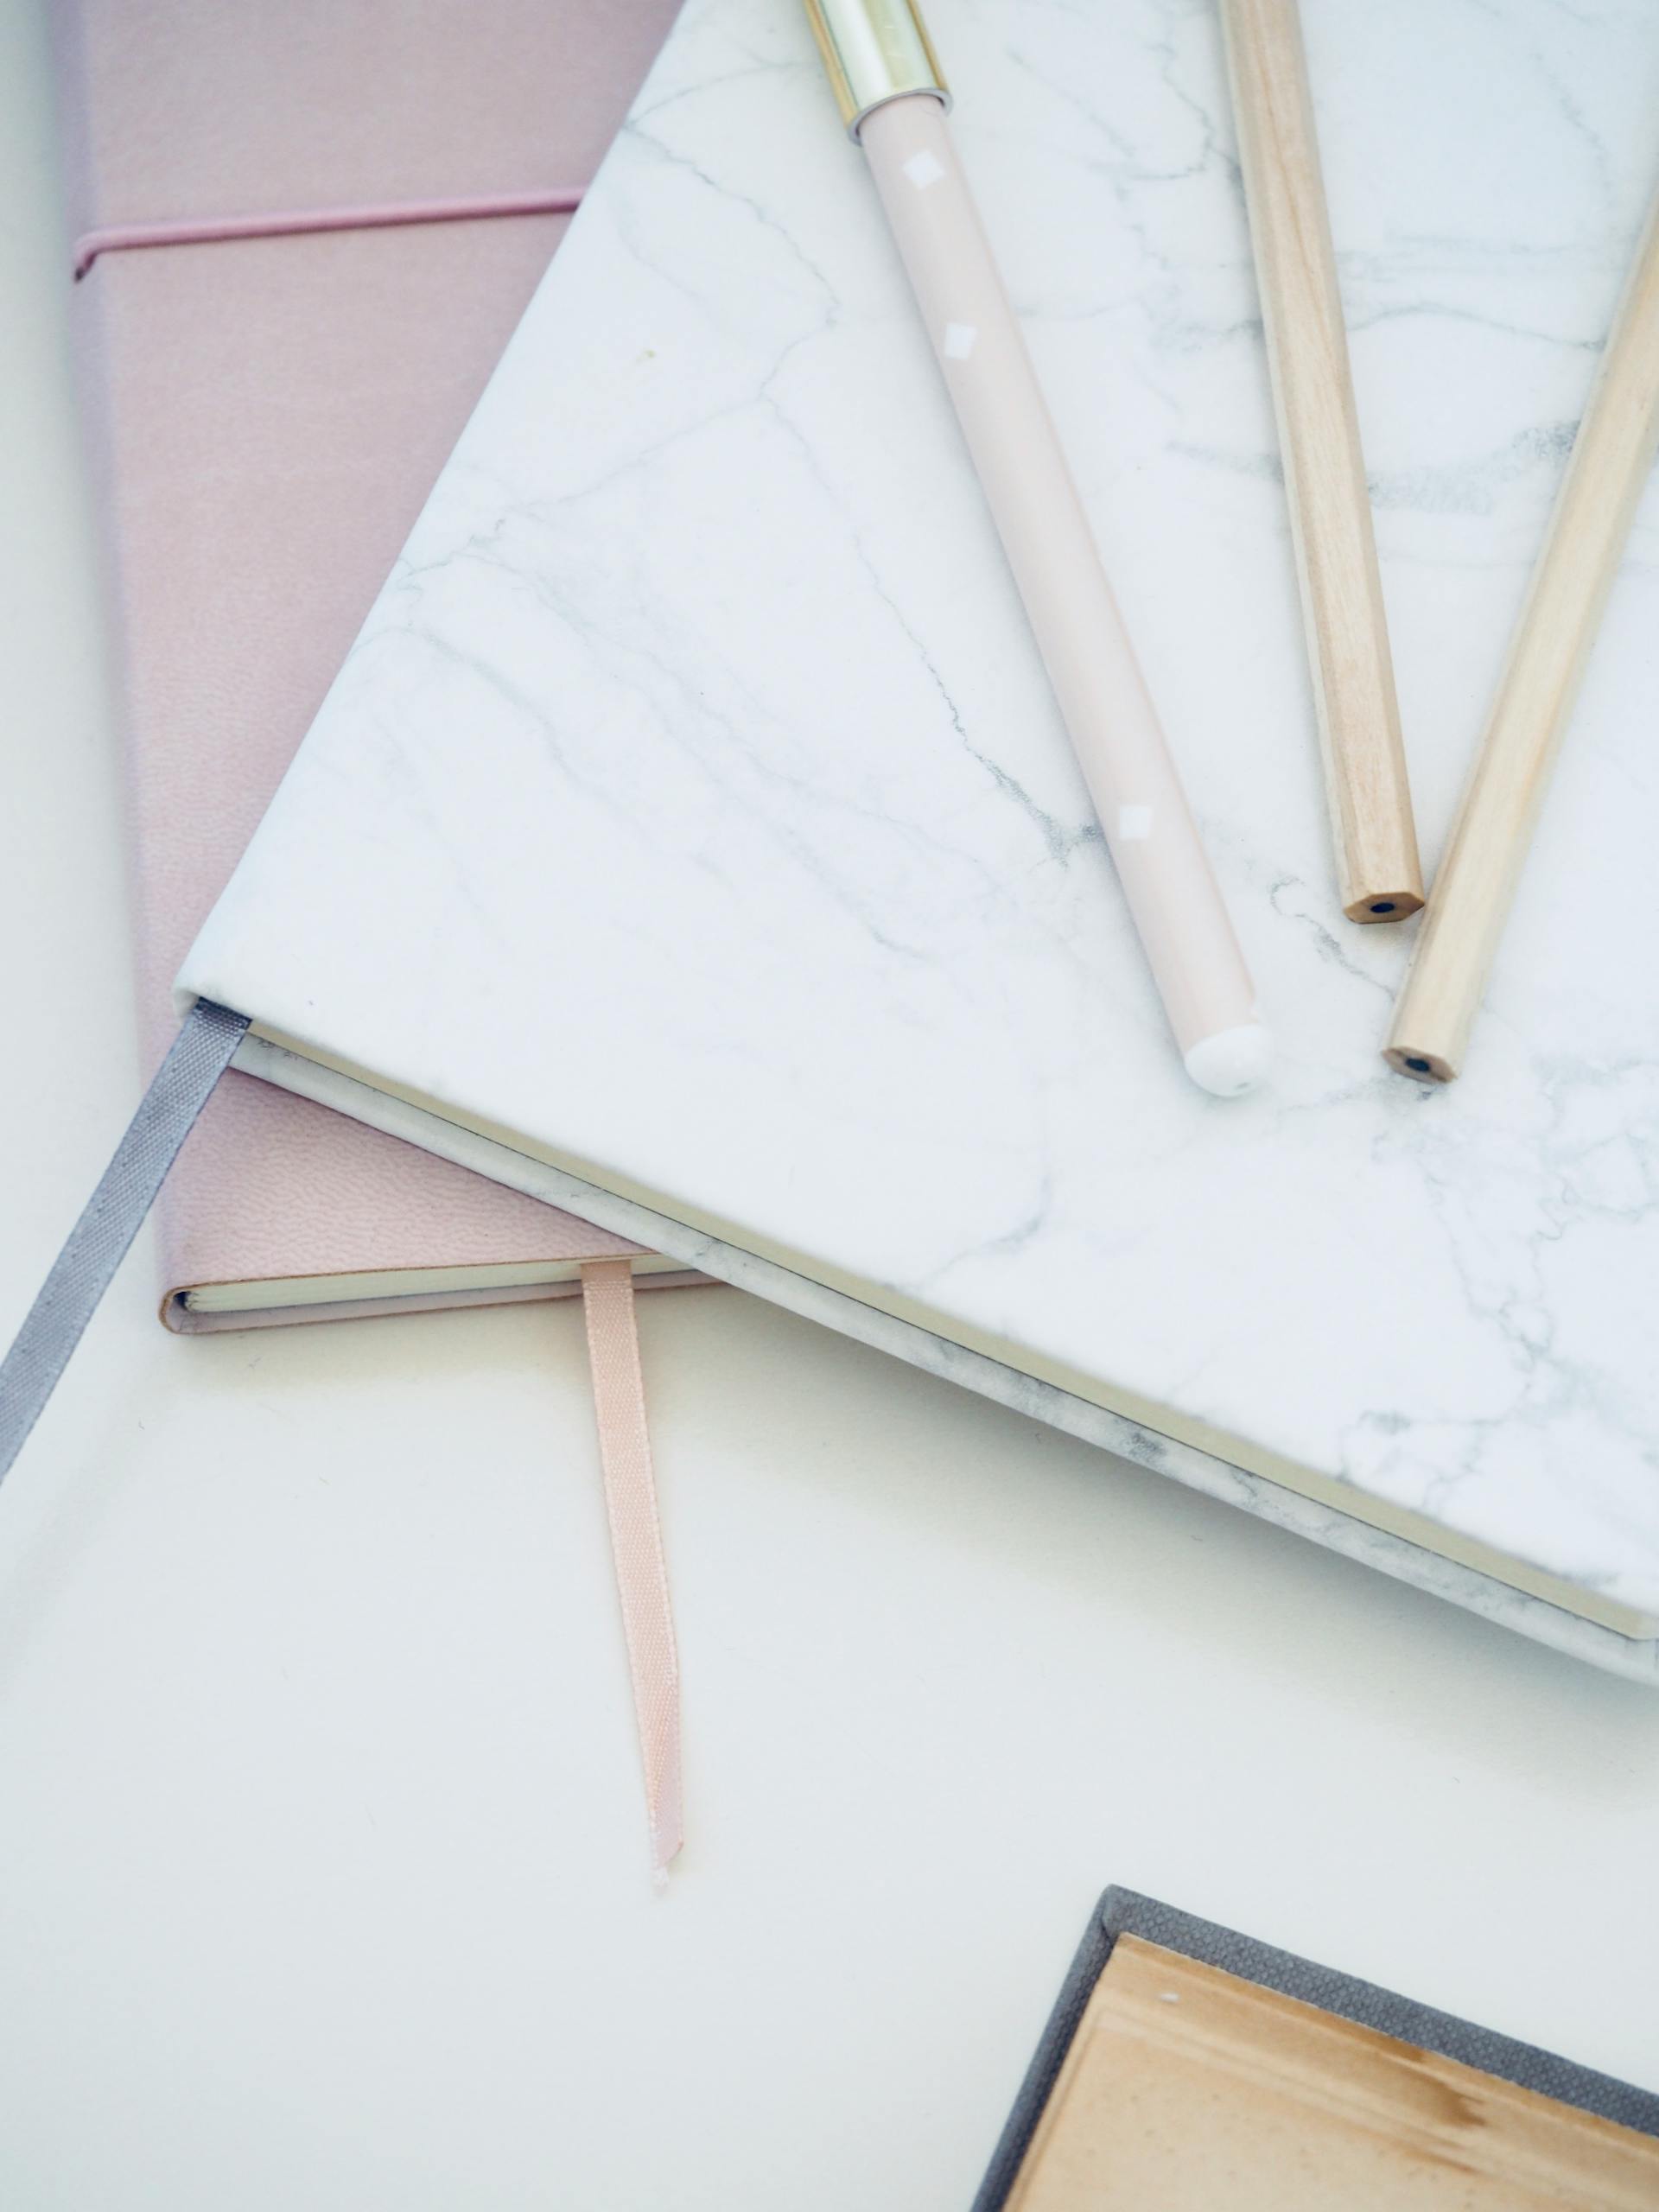 Notebooks and pens | Source: Pexels